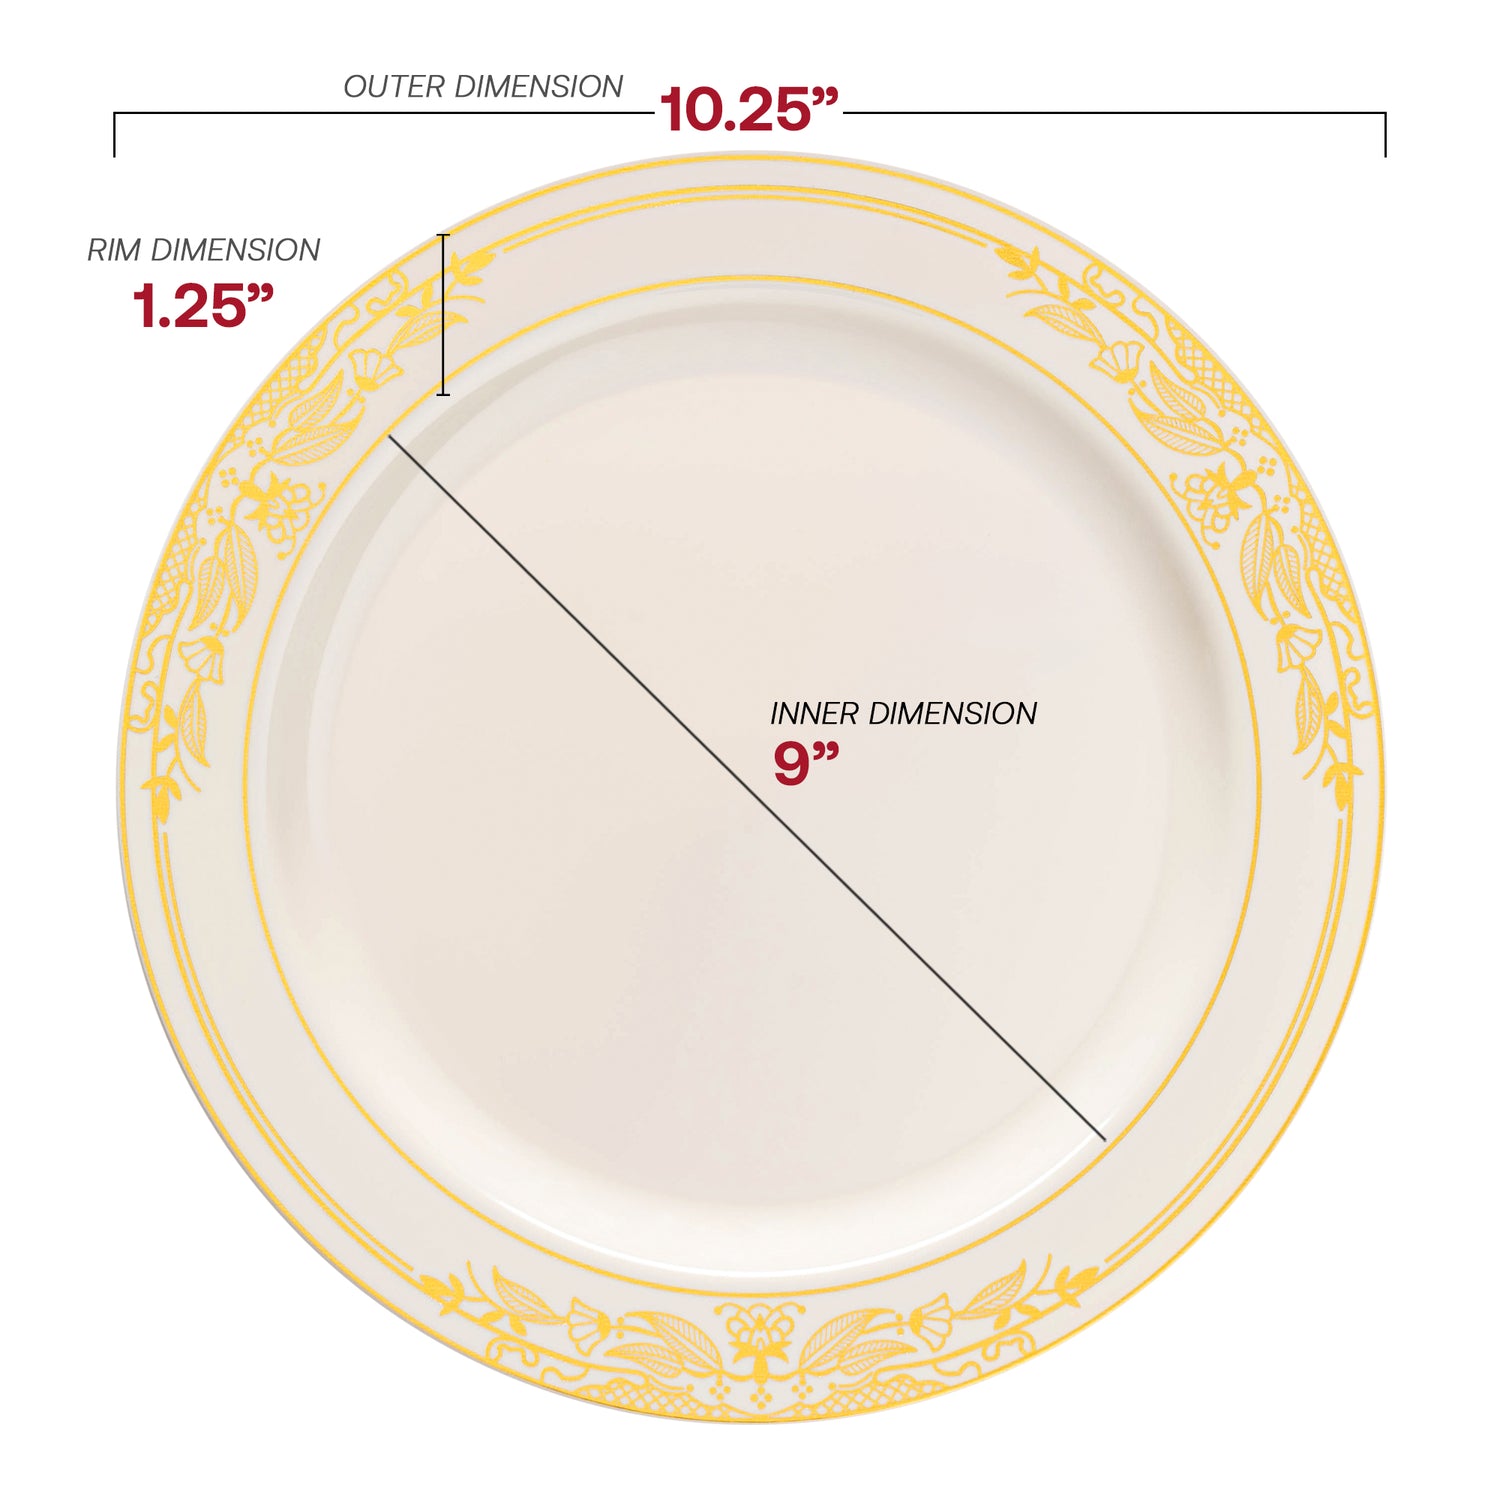 Ivory with Gold Harmony Rim Disposable Plastic Dinner Plates (10.25") Dimension | The Kaya Collection